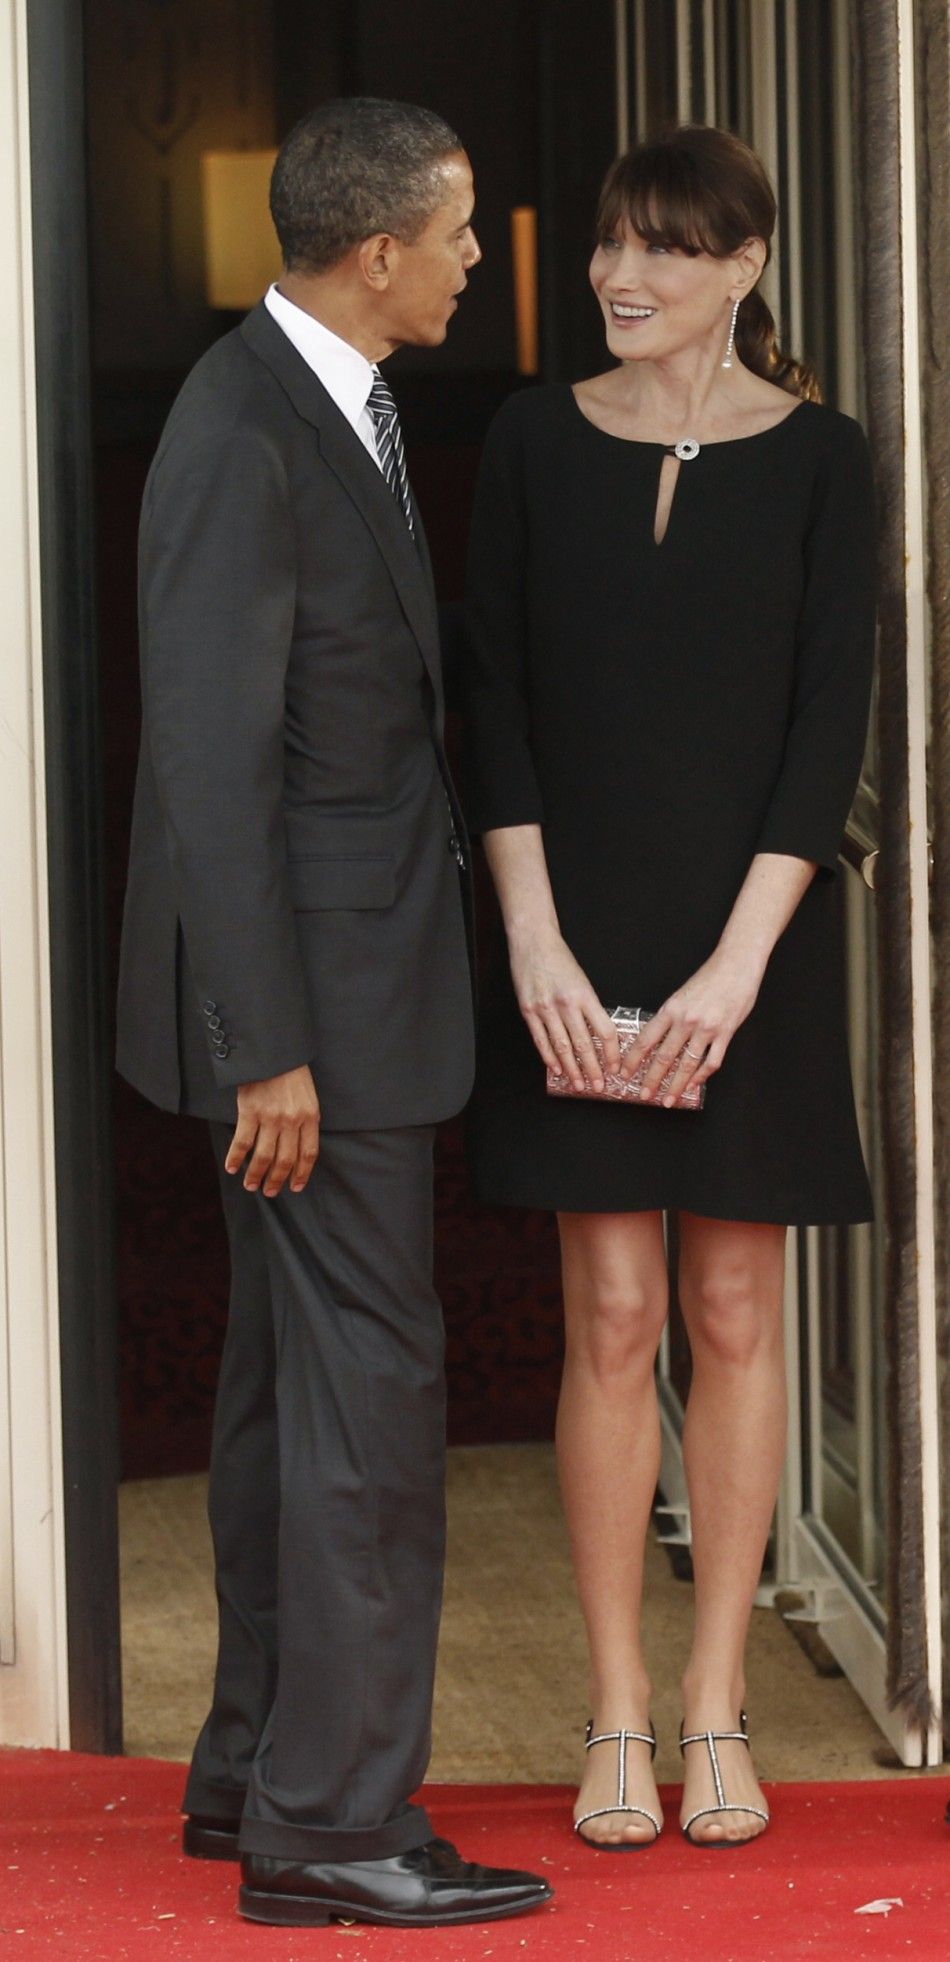 U.S. President Barack Obama is greeted by Carla Bruni-Sarkozy in Deauville